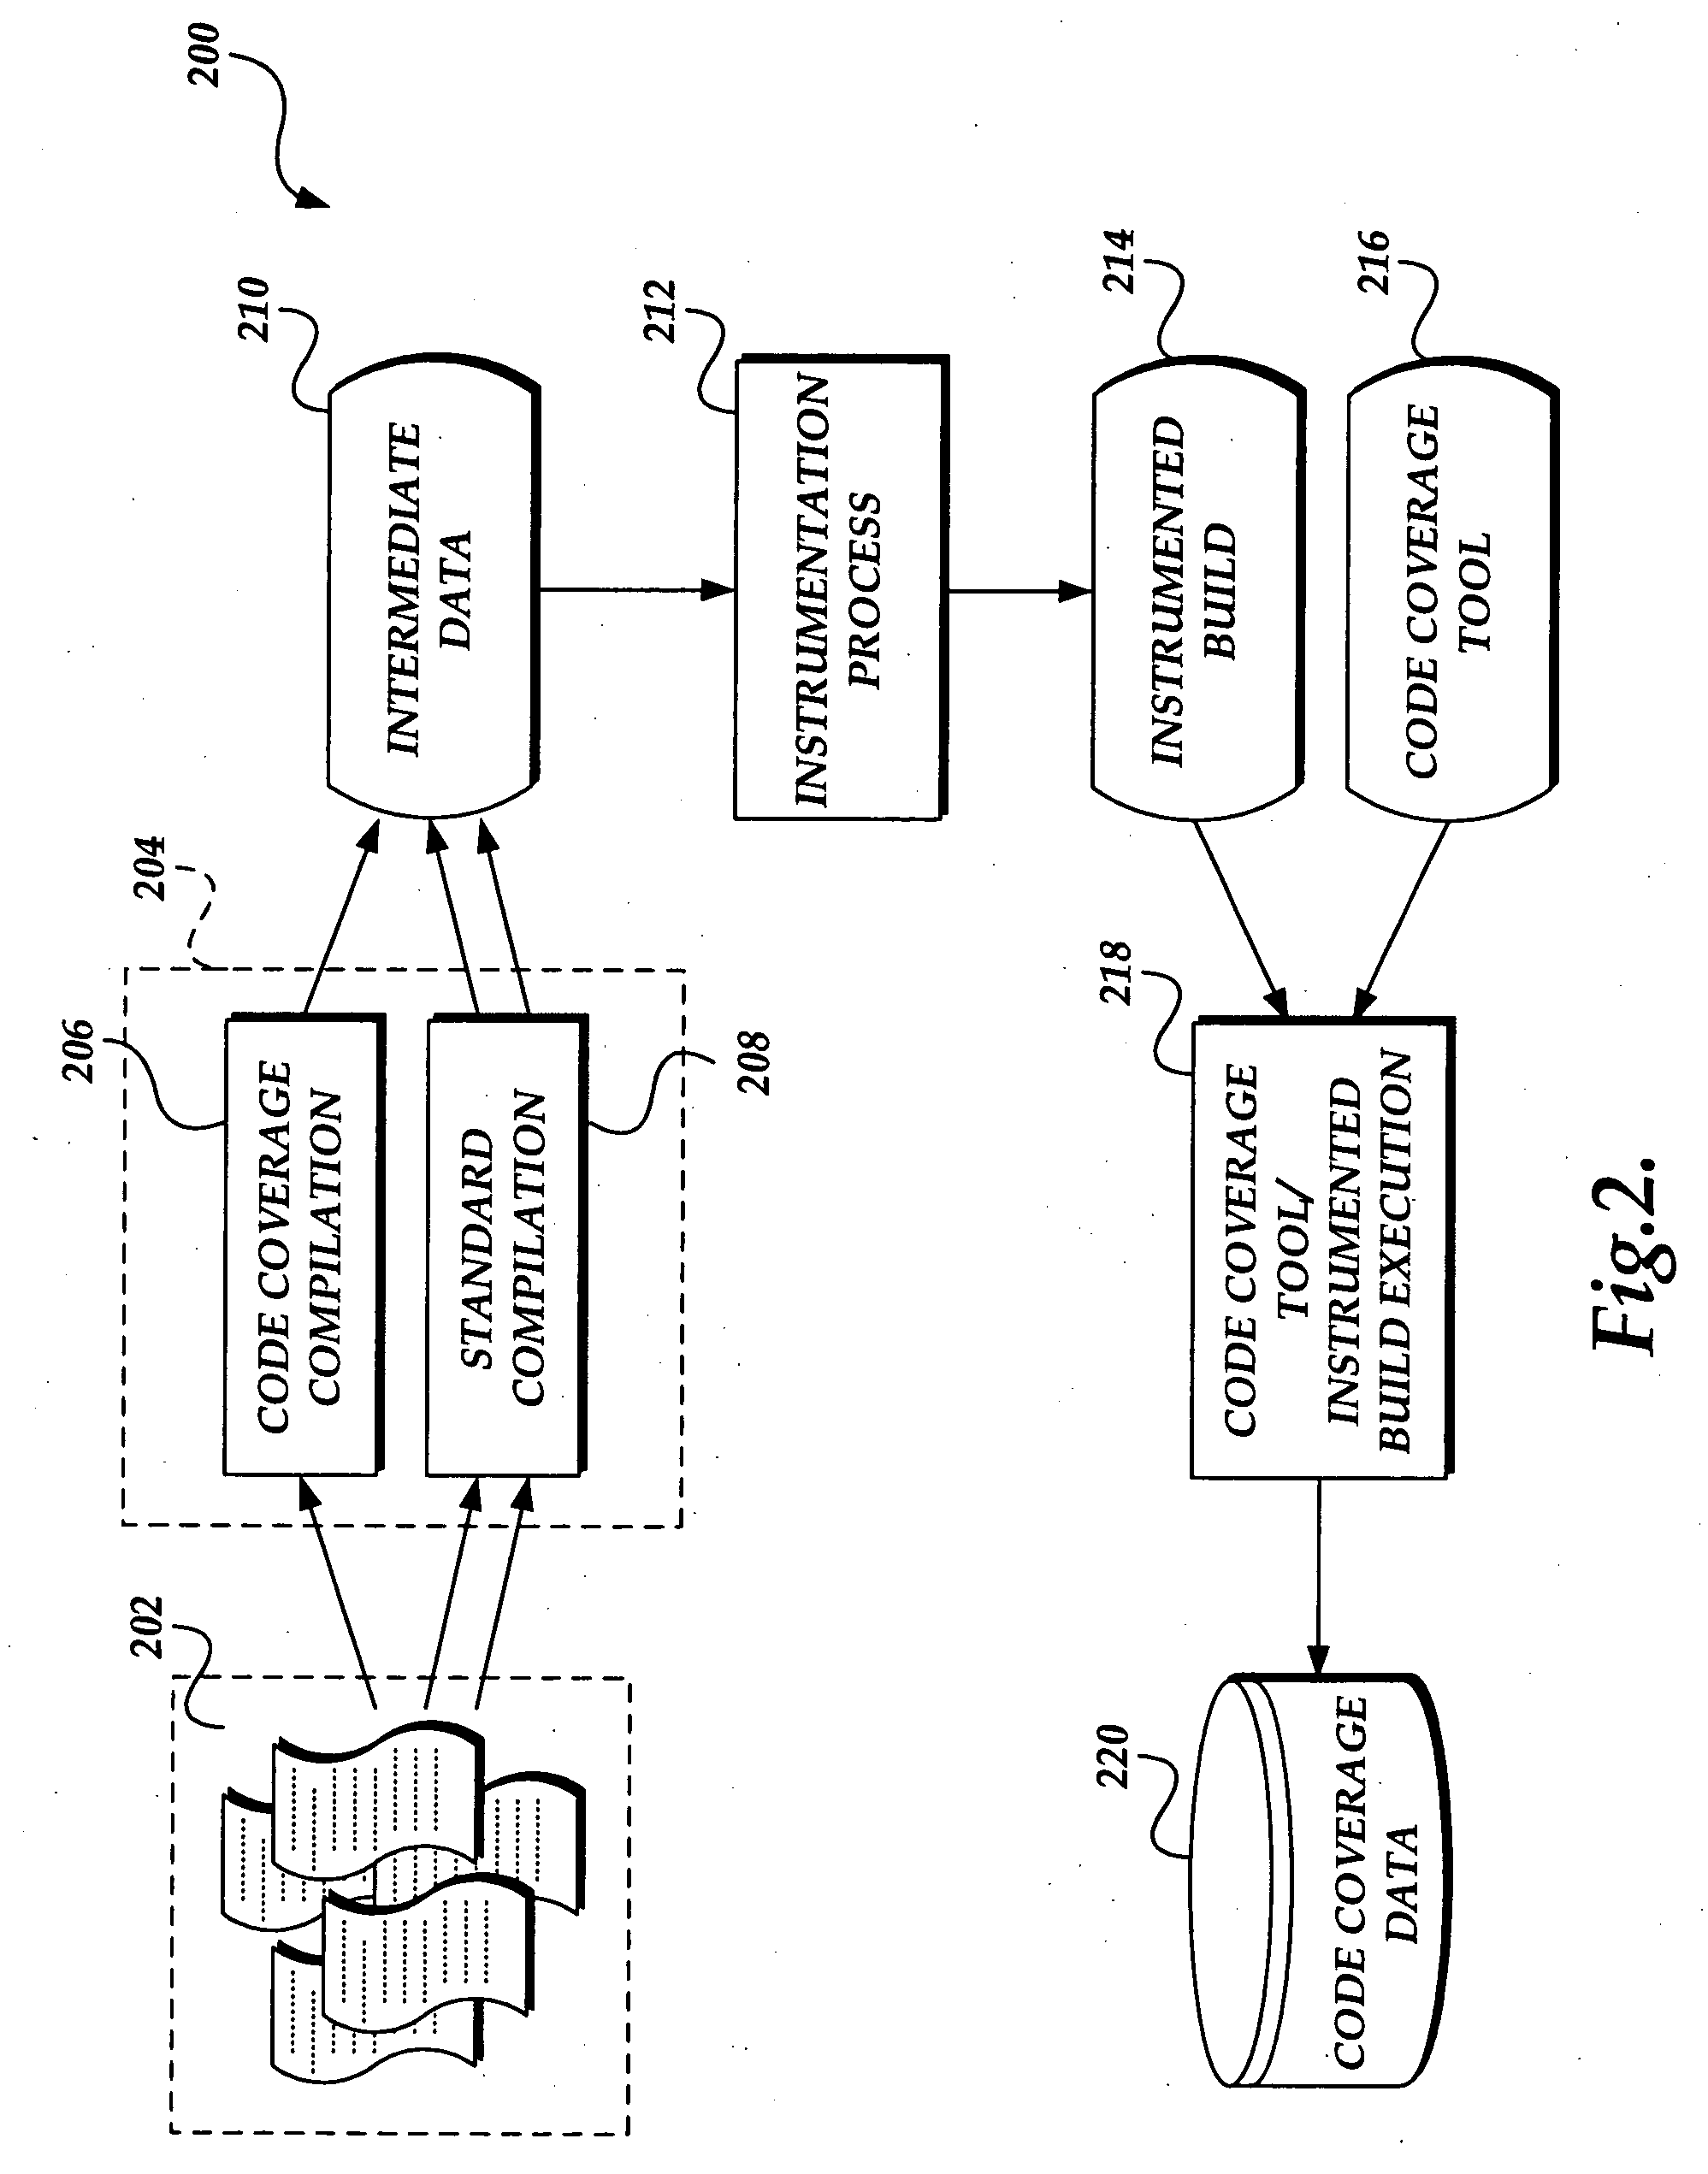 System and method for generating code coverage information